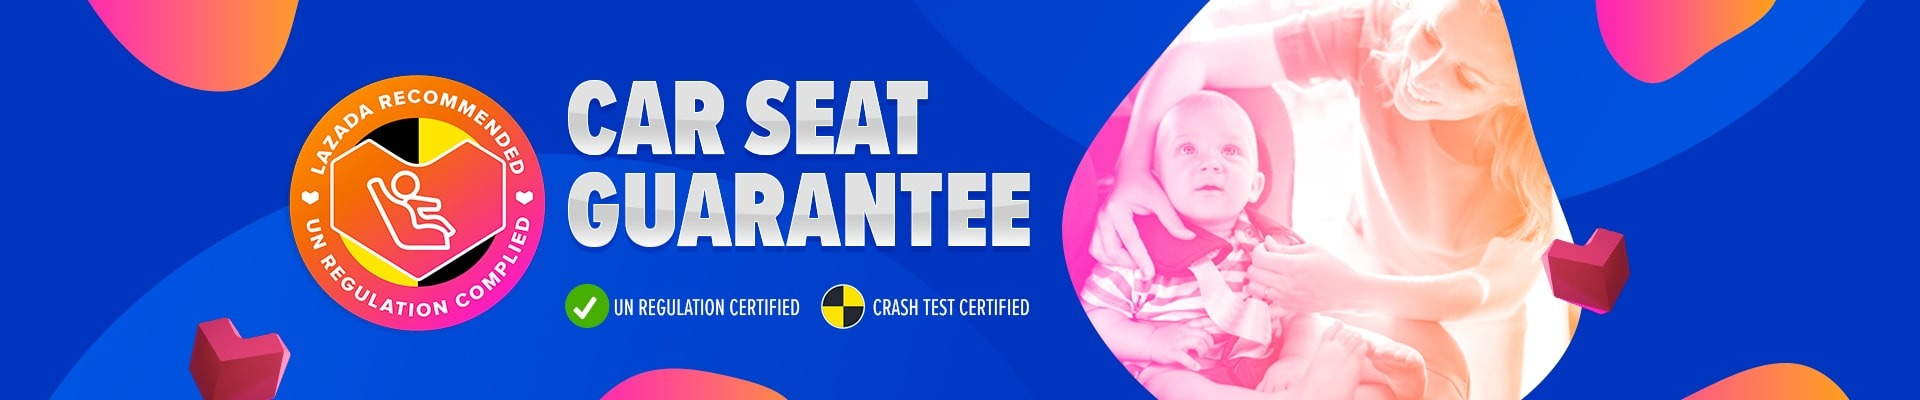 Sweet Heart Paris CS226 Group 01 Baby Car Seat Assurance JPJ Approved MIROS and ECE R44/04 Certified (Royal Space Blue)